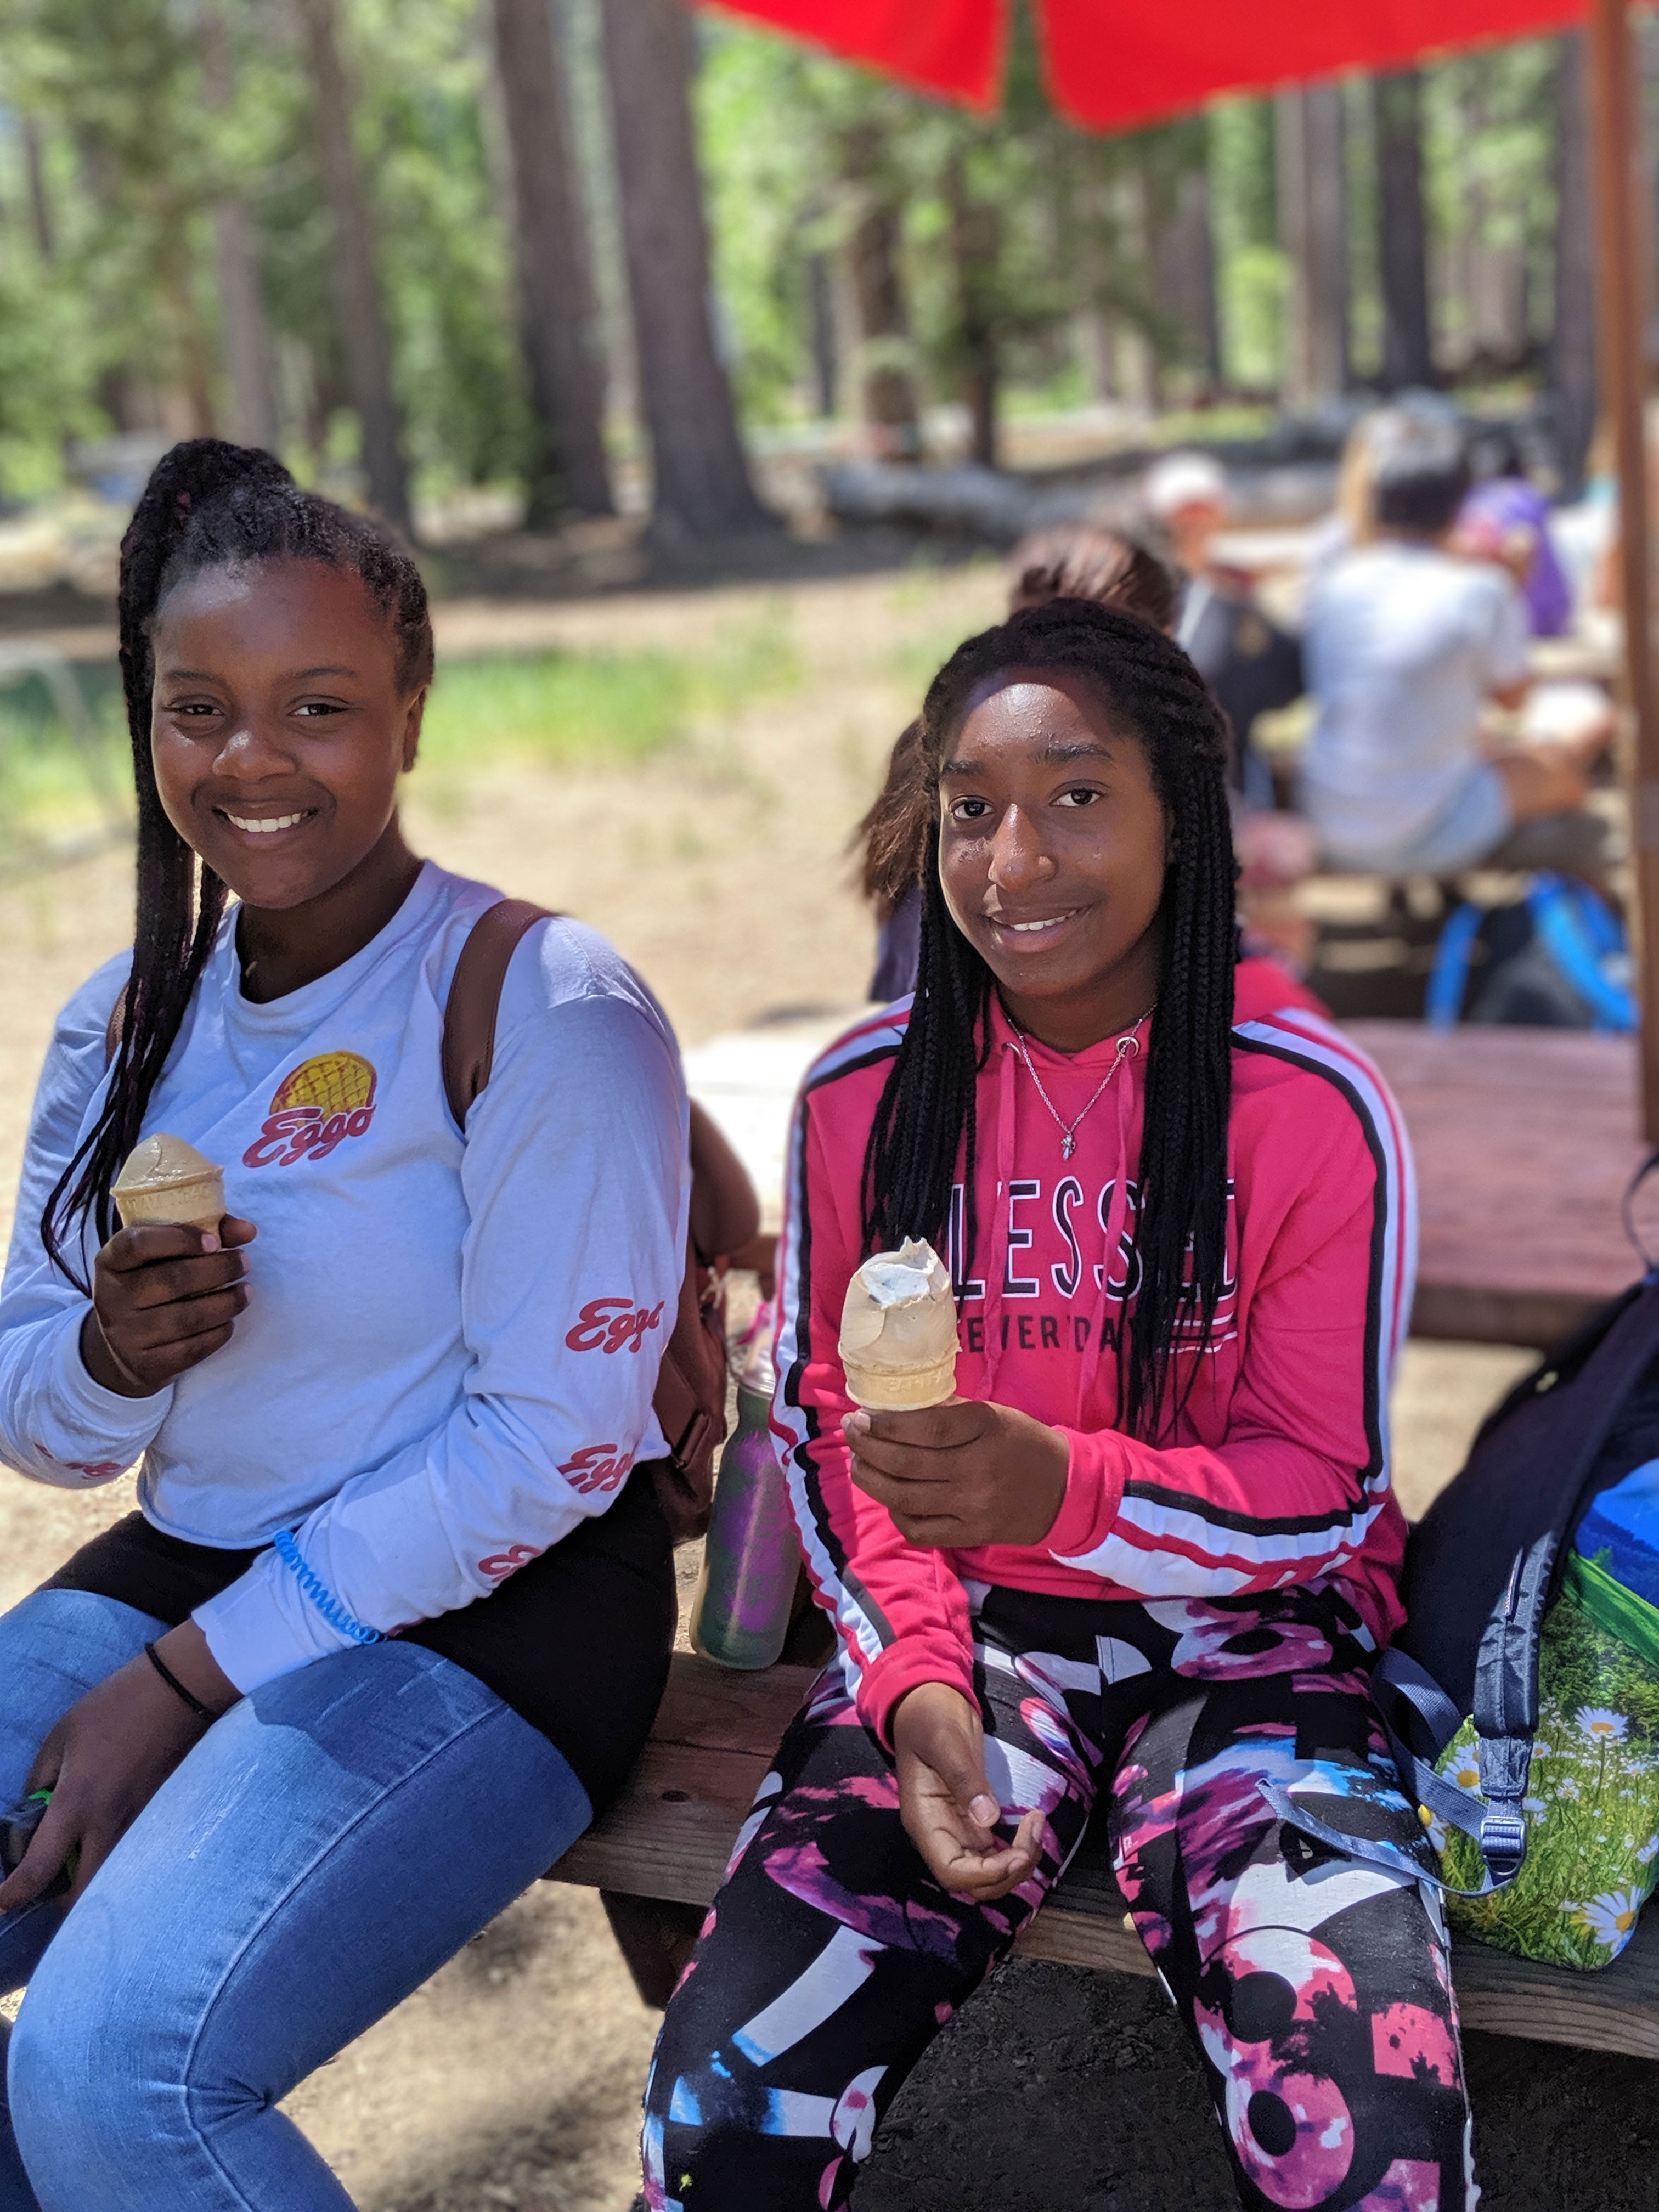 Camp Concord Youth Adventure